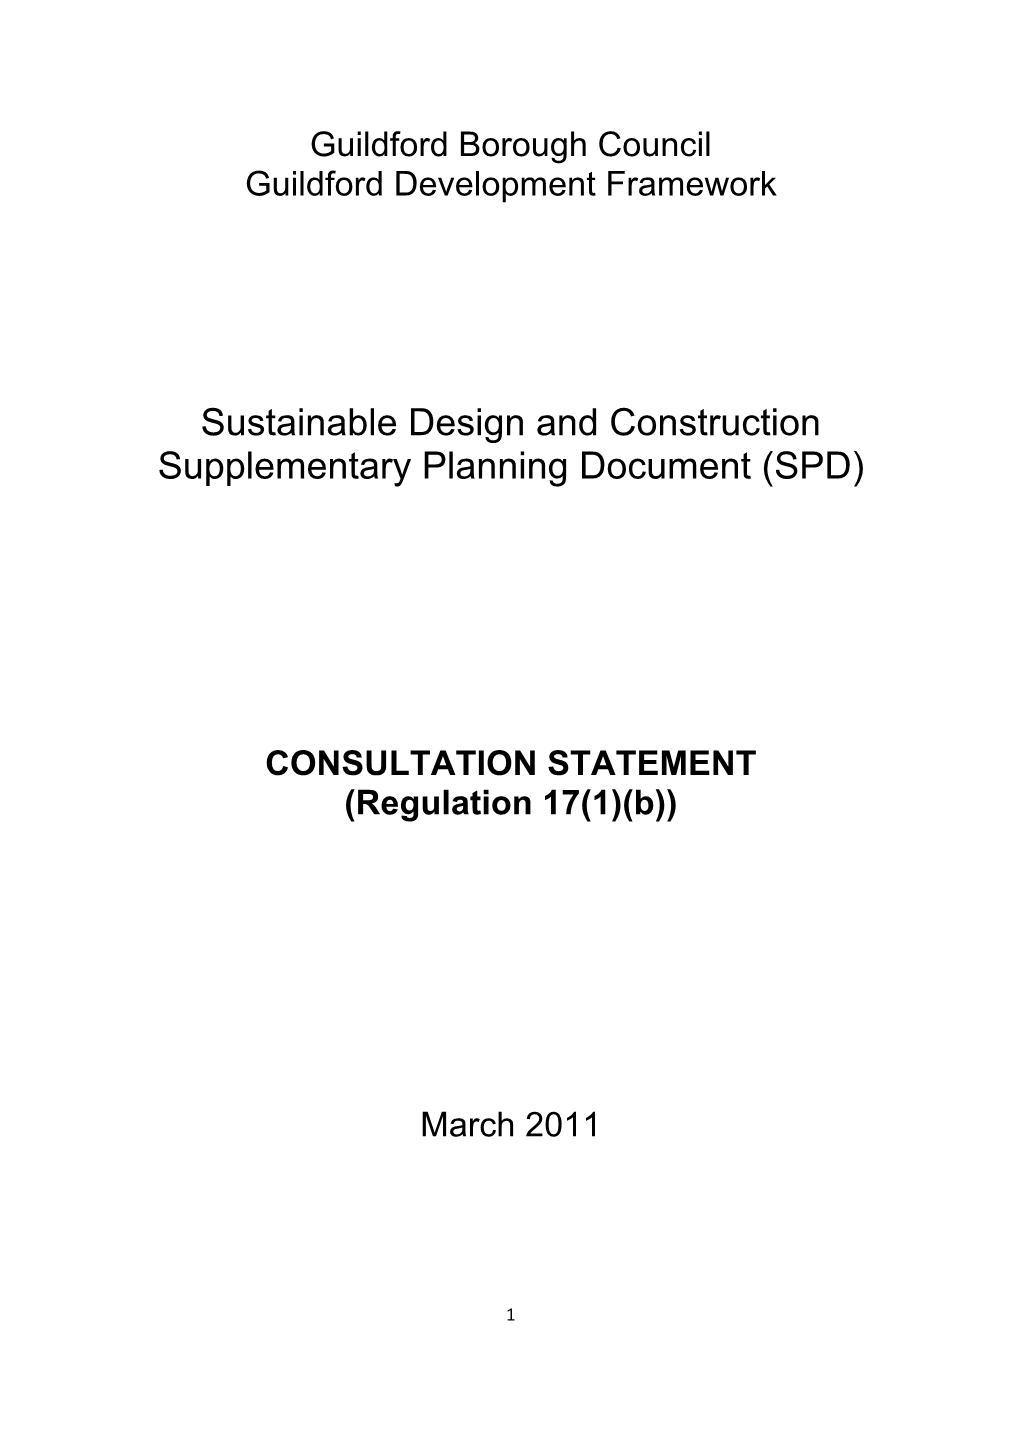 Sustainable Design and Construction Supplementary Planning Document (SPD)